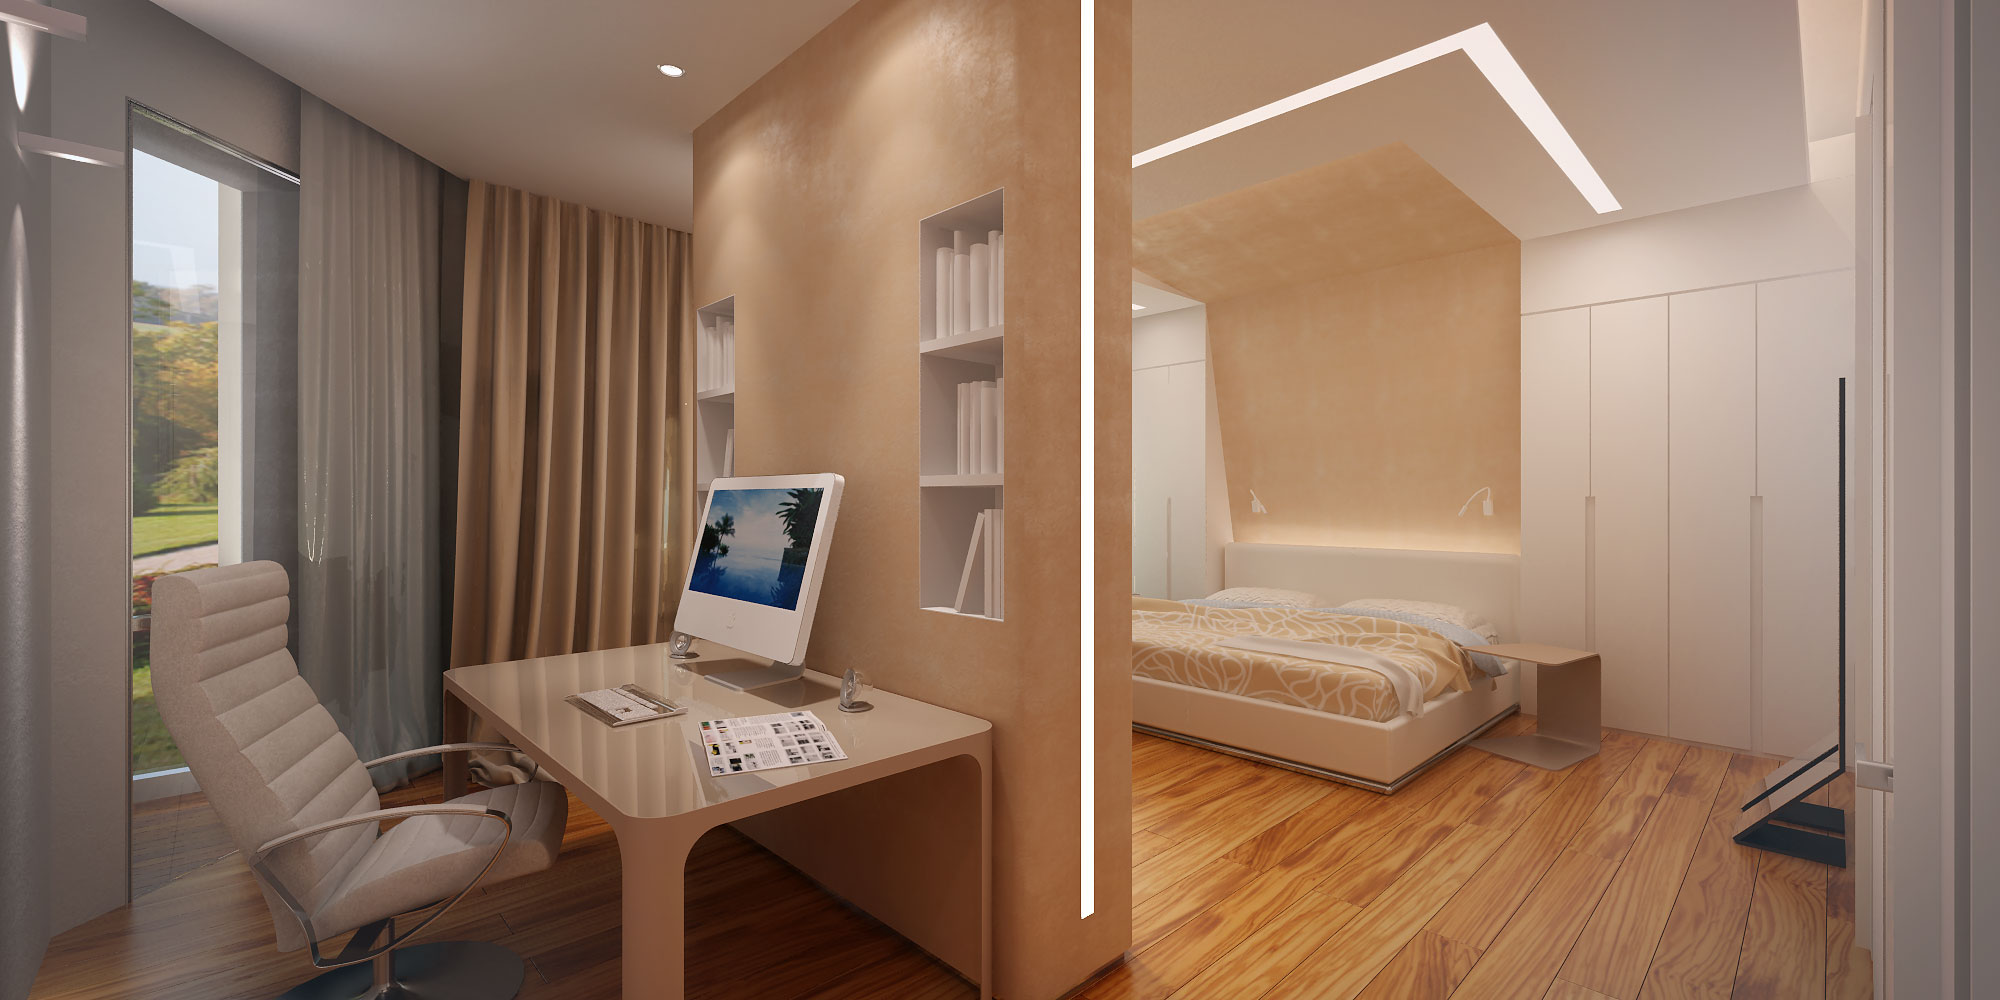 study bedroom with decorative partition